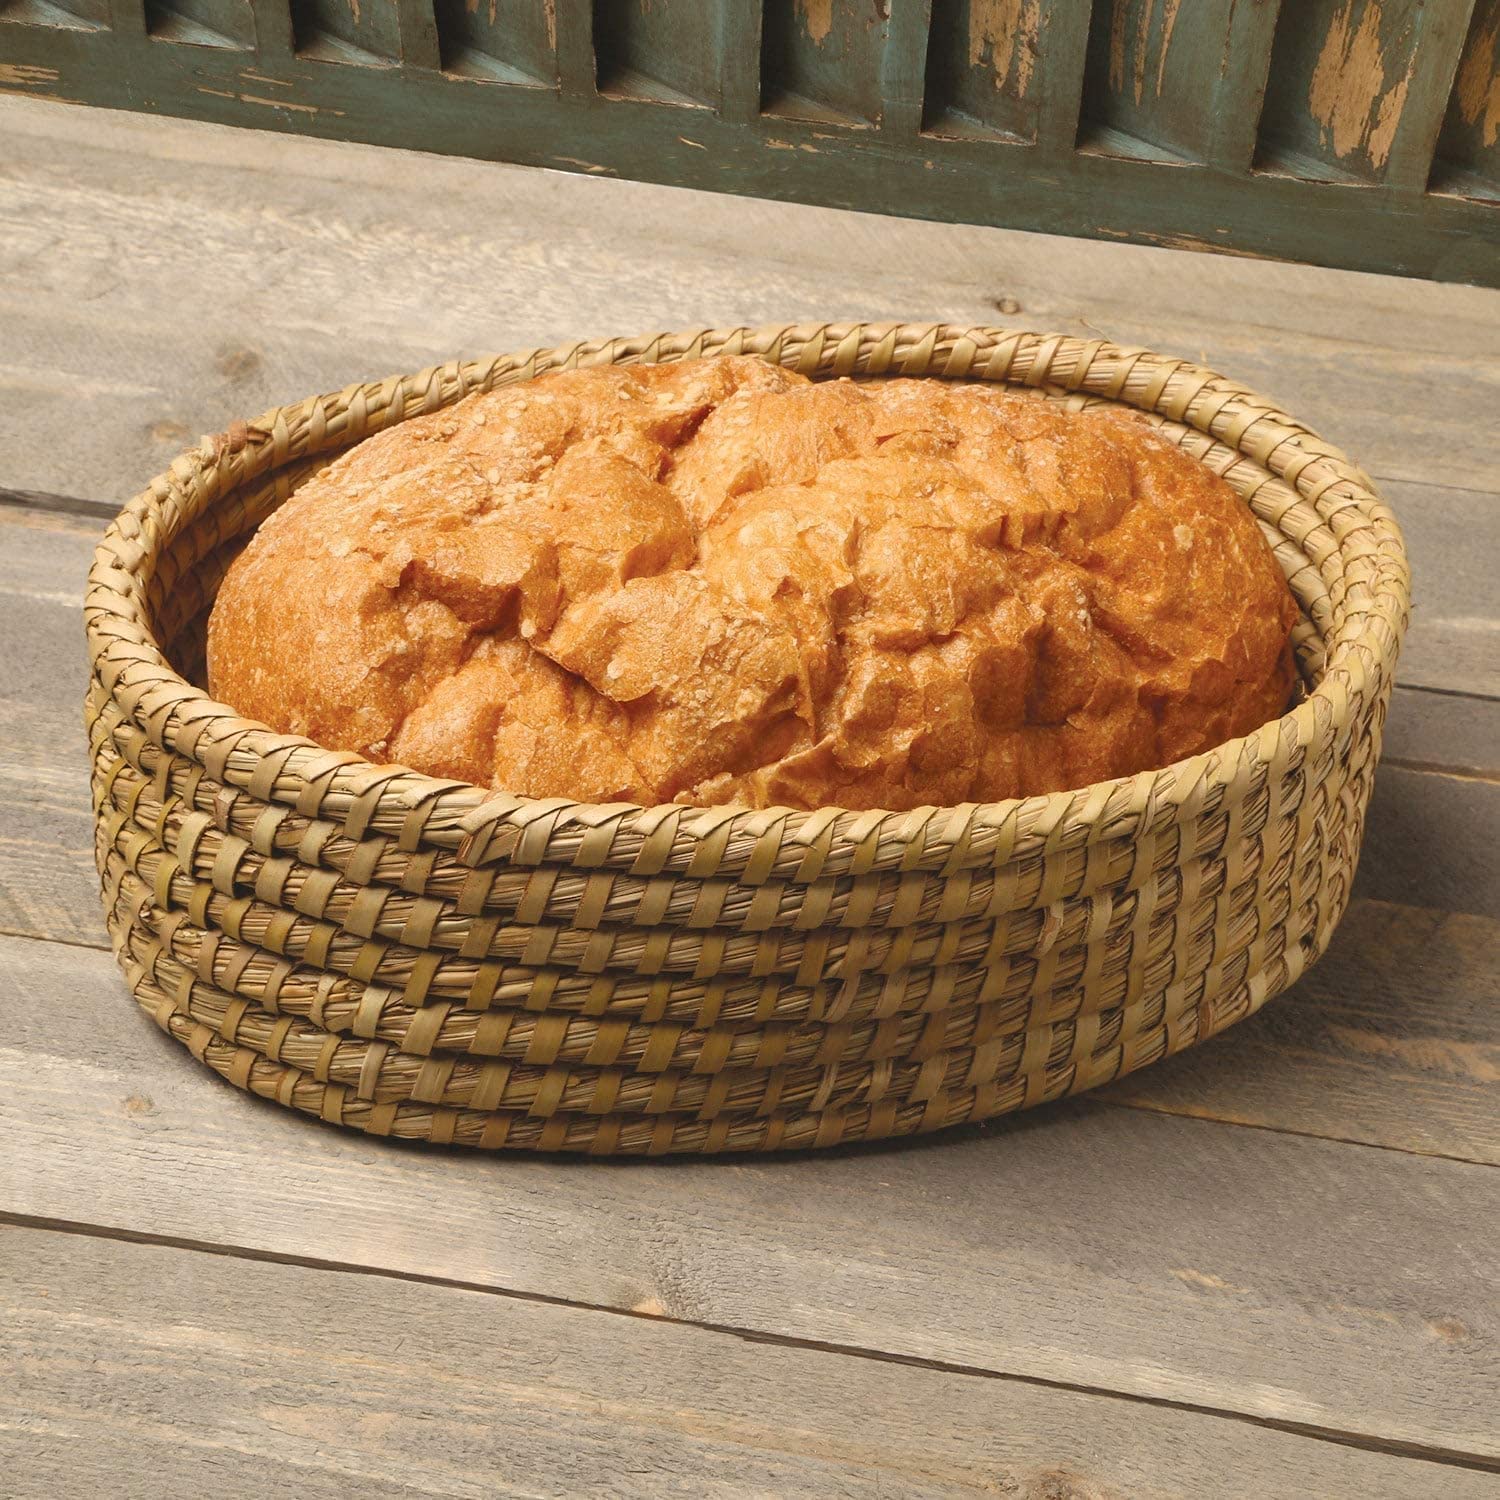 Bread Warmer Basket with Stone - Bread Basket for Serving Tortilla, Sourdough, Bakers Gift, Warming Terracotta, House New Home Gifts for Kitchen, Bread Maker Women, Men, Birthday, Hostess Farmhouse